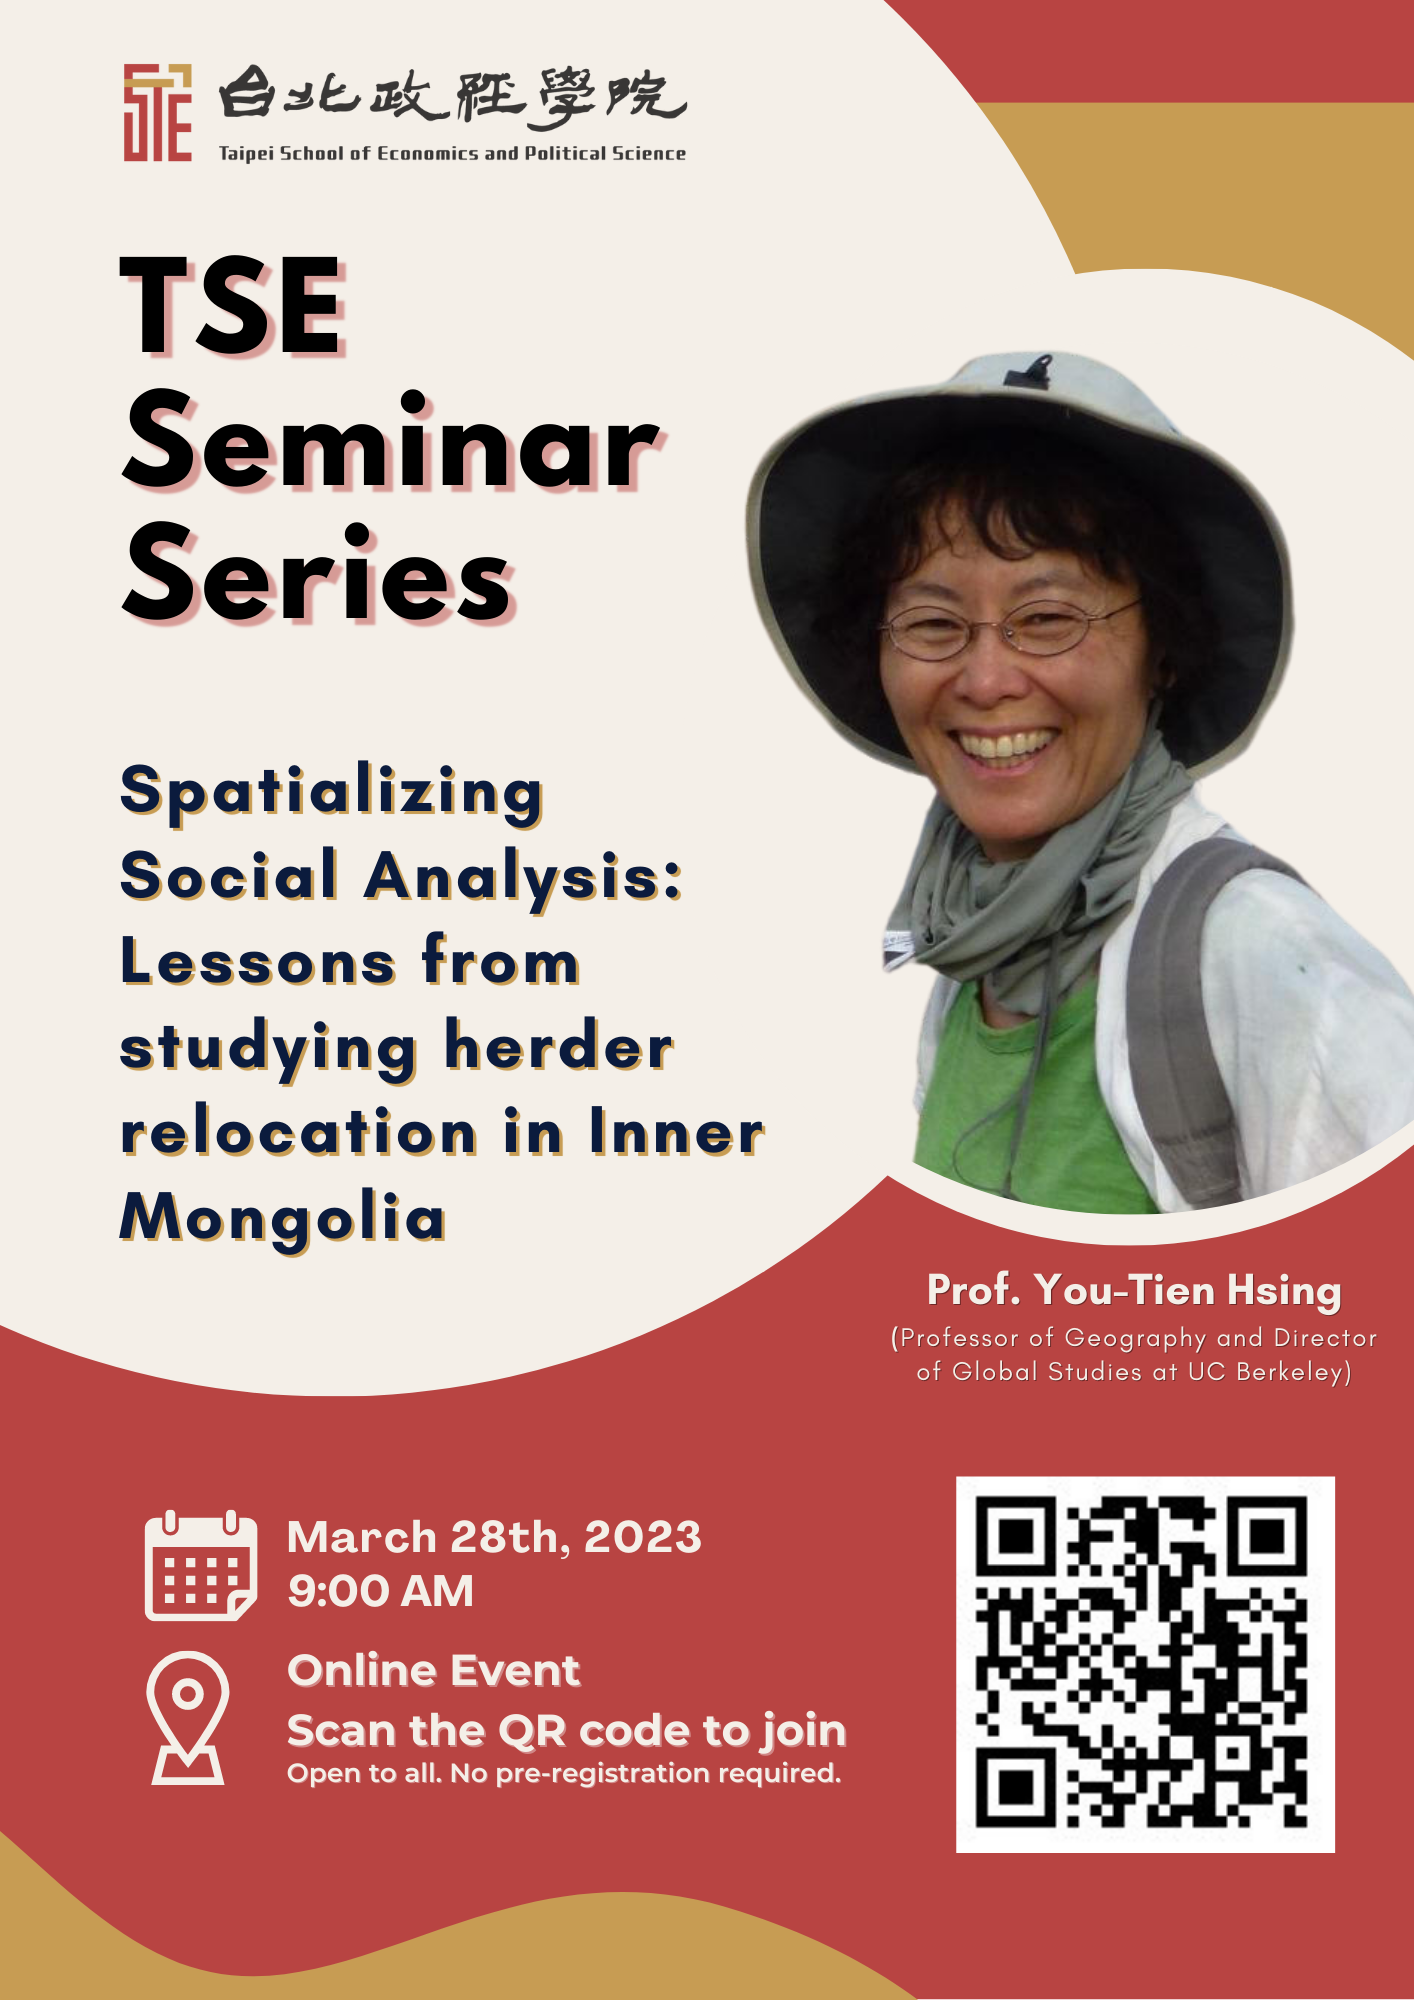 Spring 2023 Seminar Series No. 2 | Spatializing Social Analysis: Lessons from studying herder relocation in Inner Mongolia